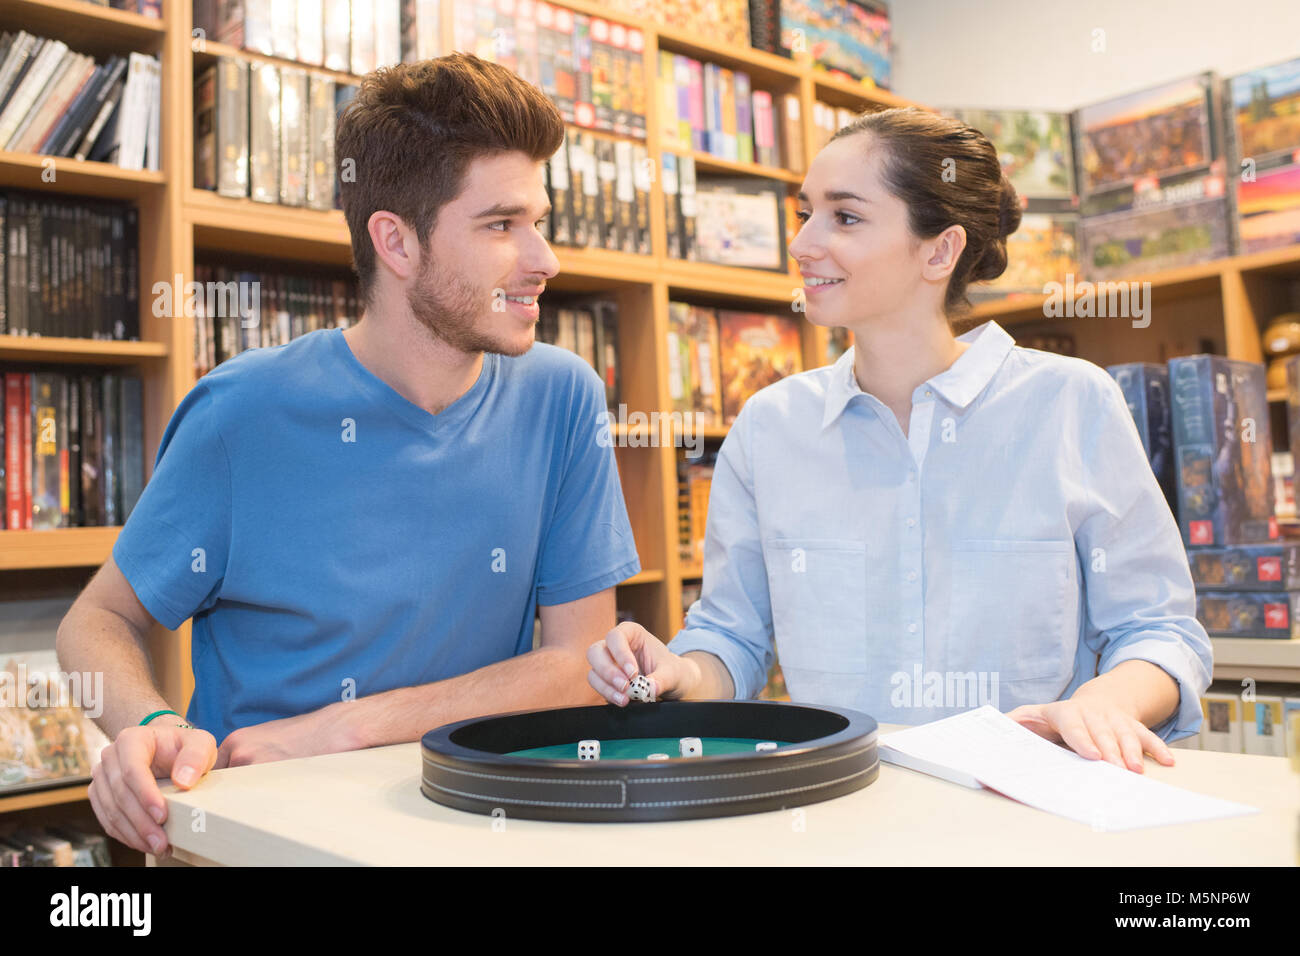 couple in love playing ludo board game at a store Stock Photo